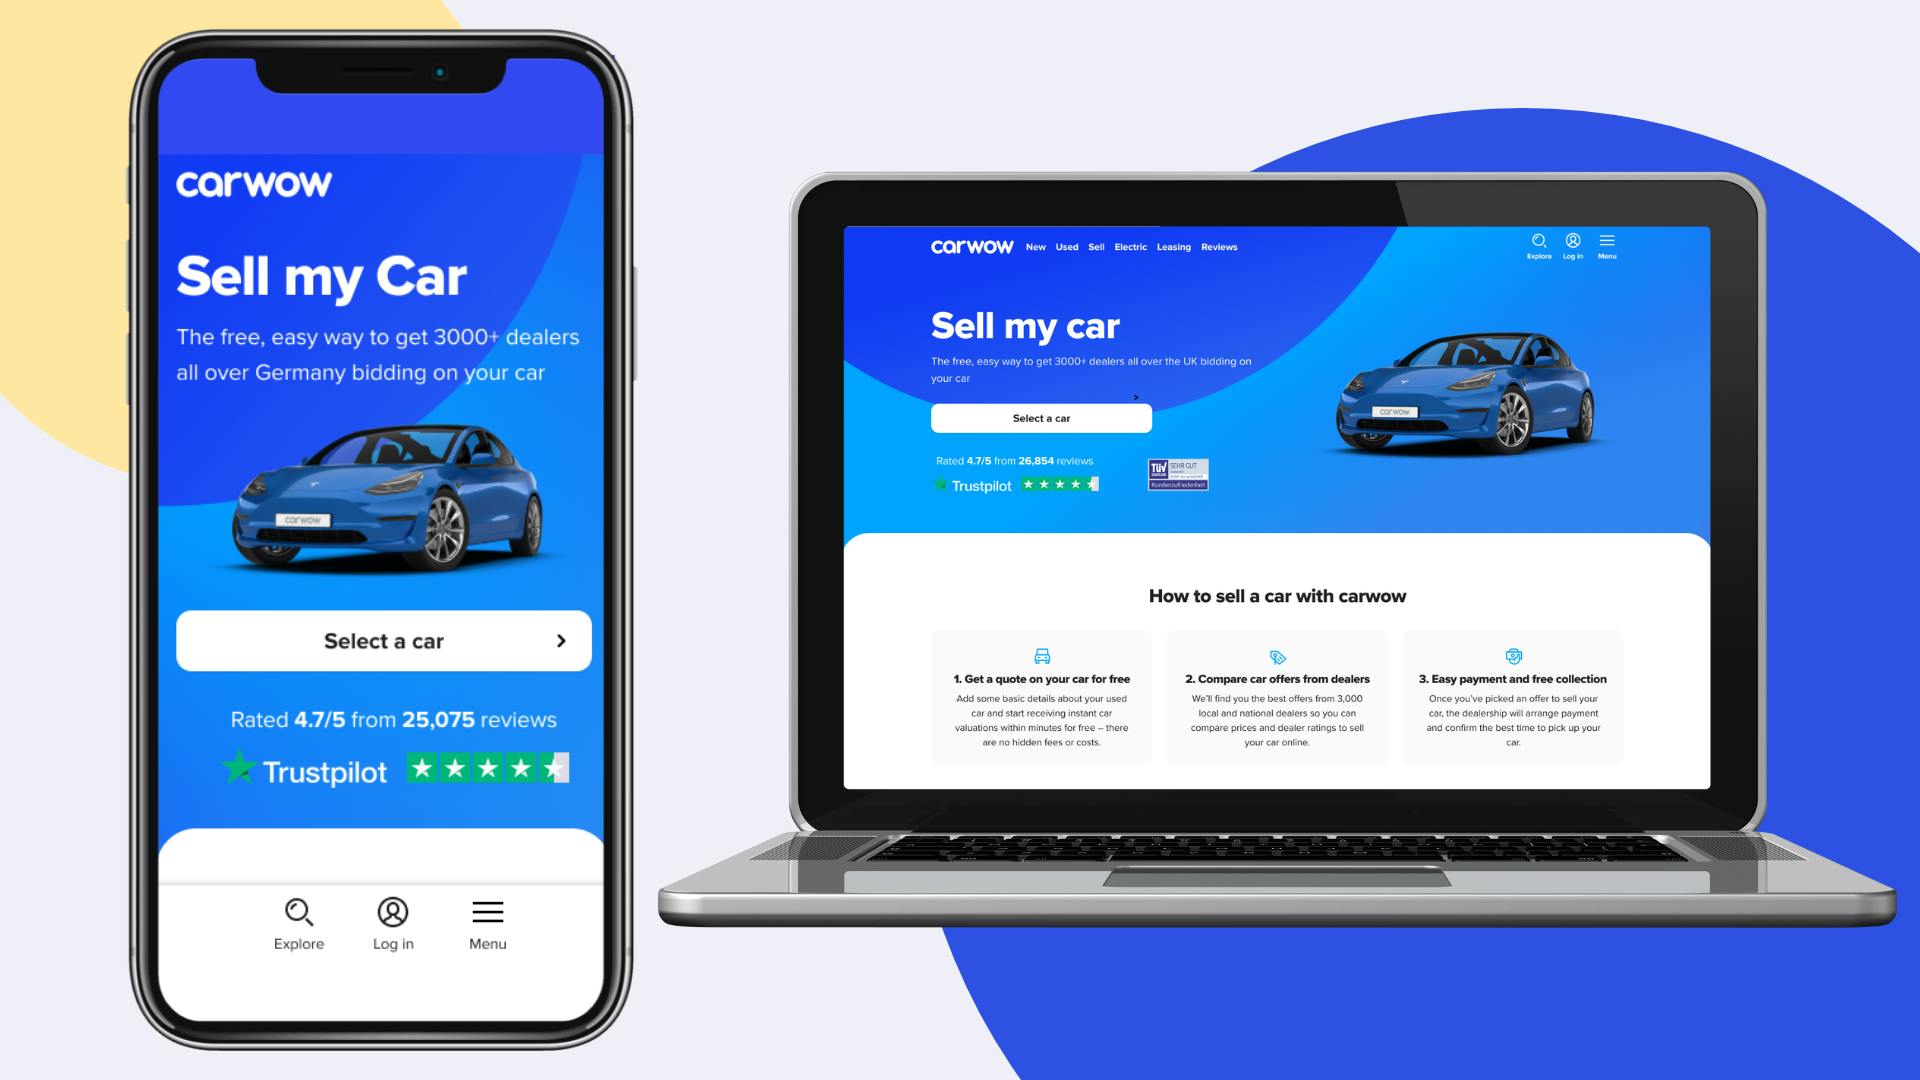 Image of a mobile phone and a laptop displaying carwow's Sell Your Car welcome screen